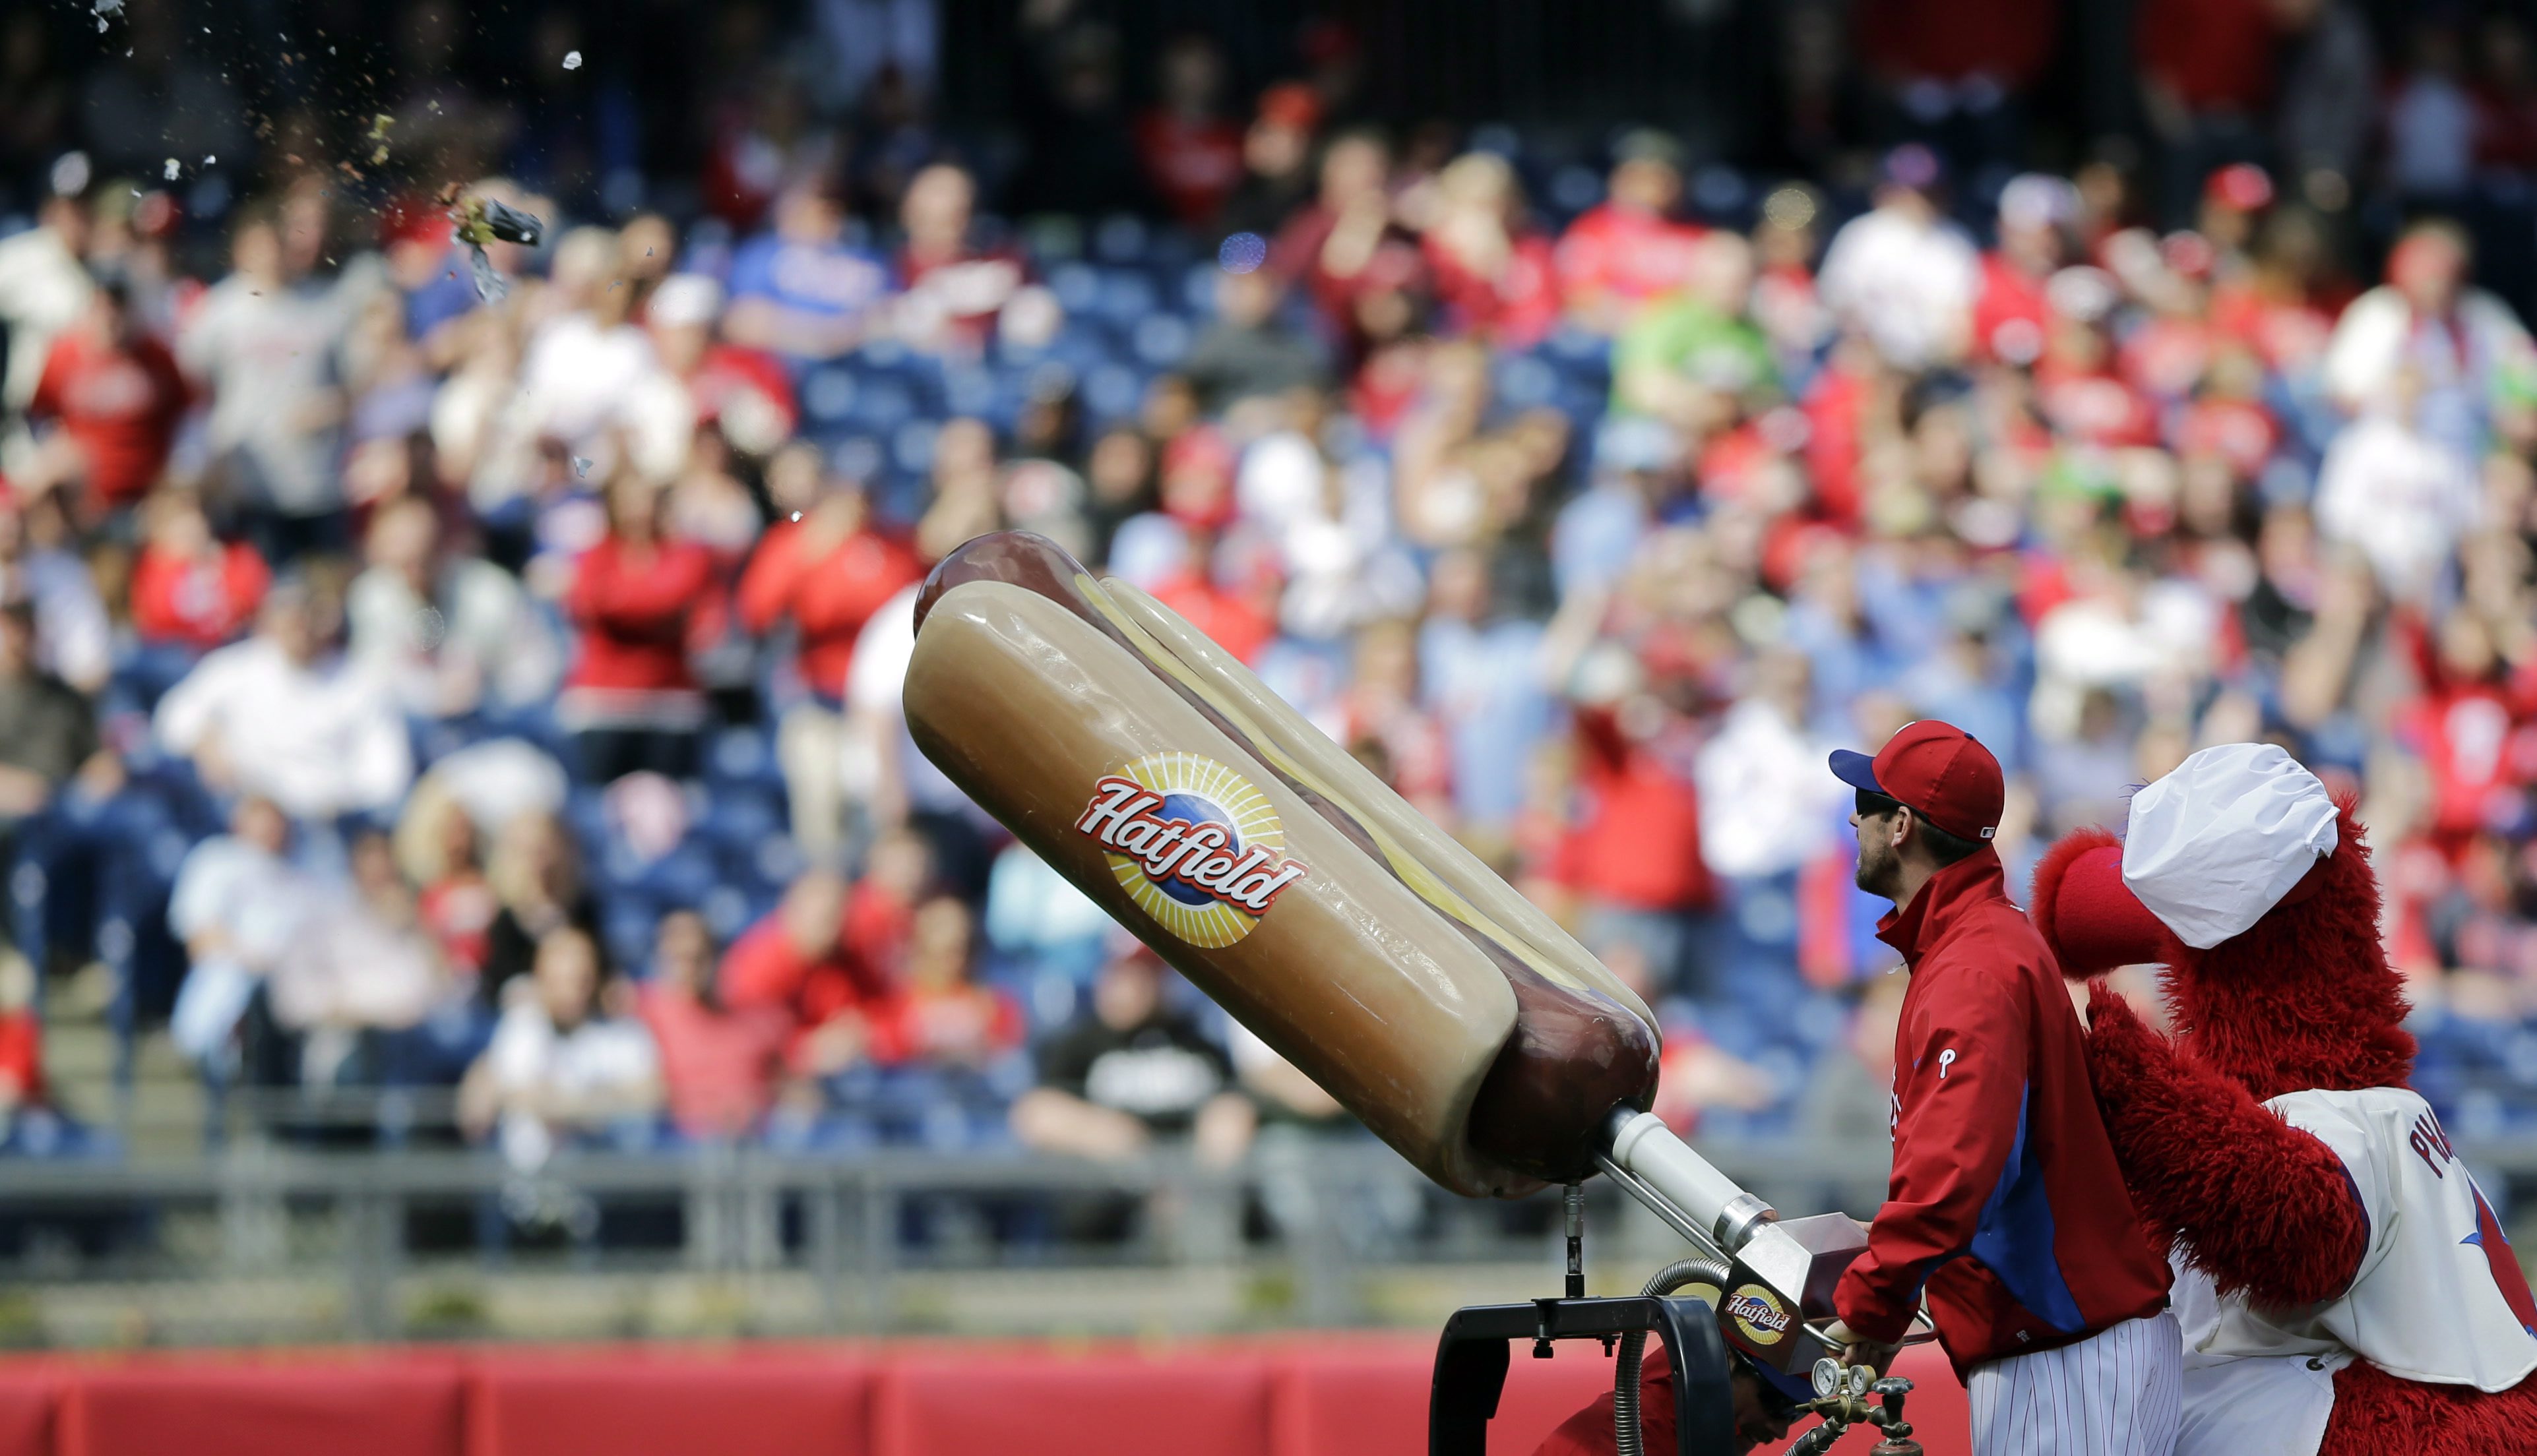 Phillies fan injured after Phillie Phanatic's flying hot dog hit her in the  face